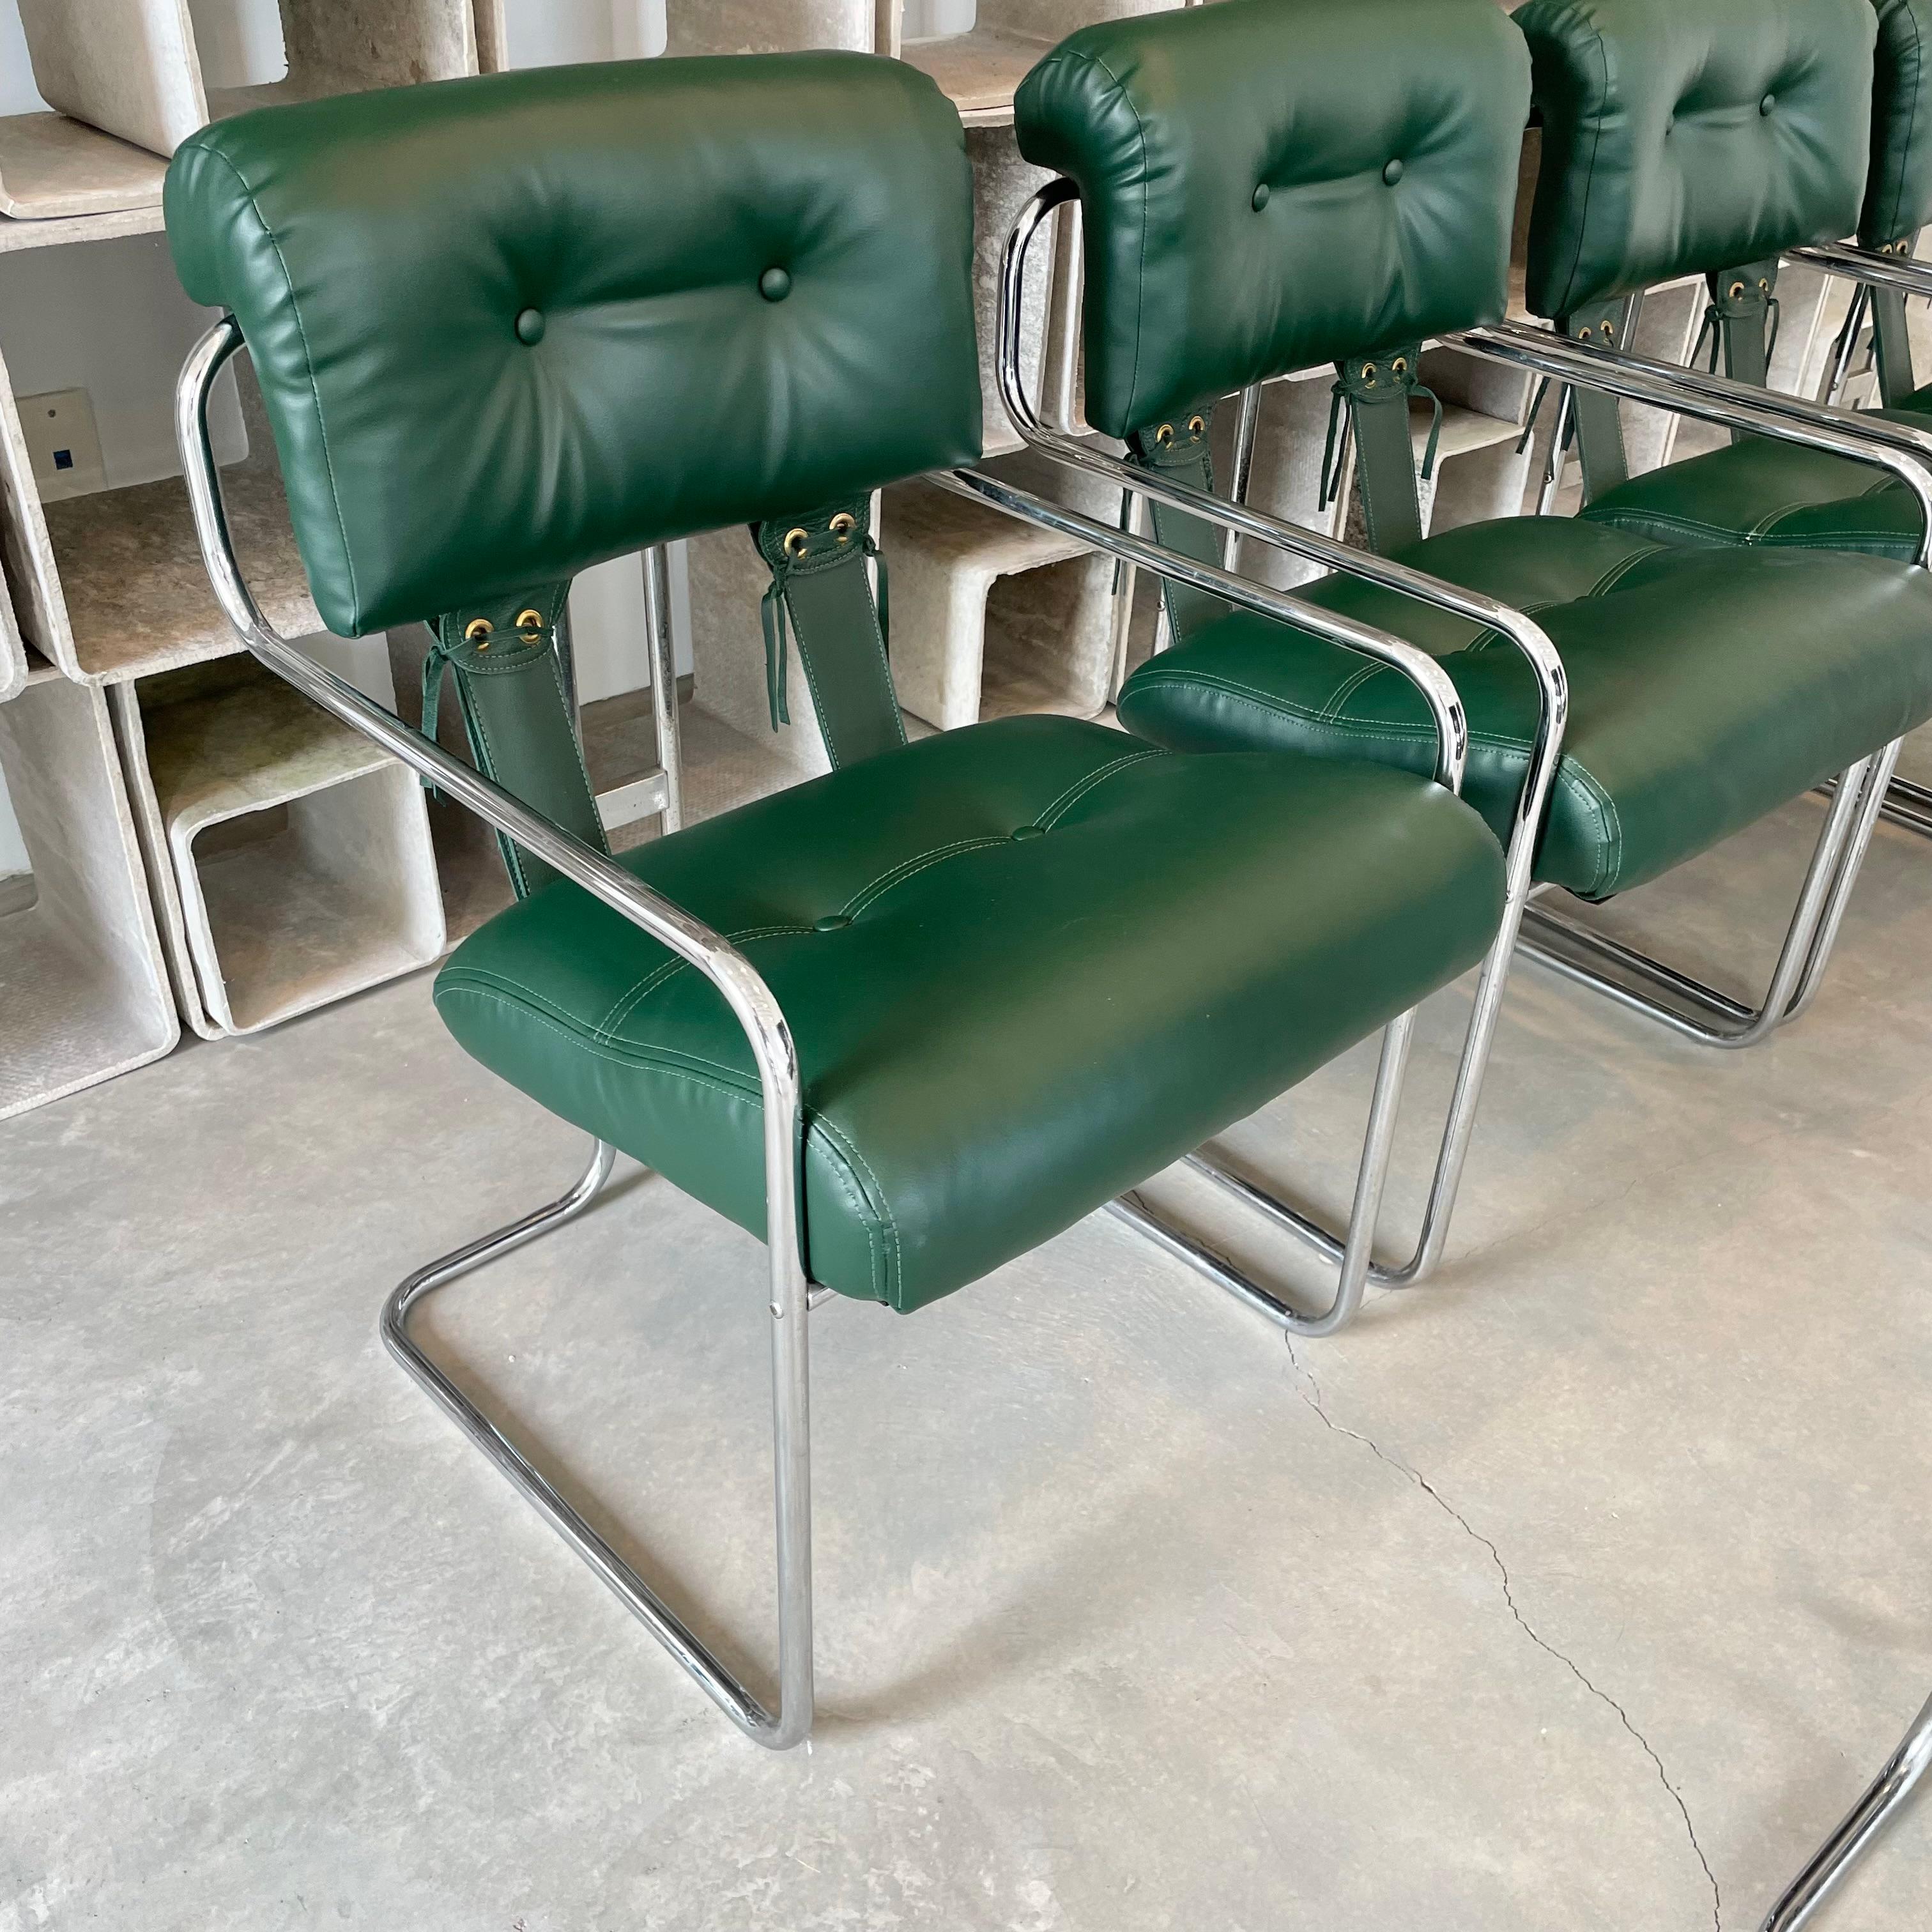 Late 20th Century Set of 7 'Tucroma' Chairs in Green by Guido Faleschini, 1970s Italy